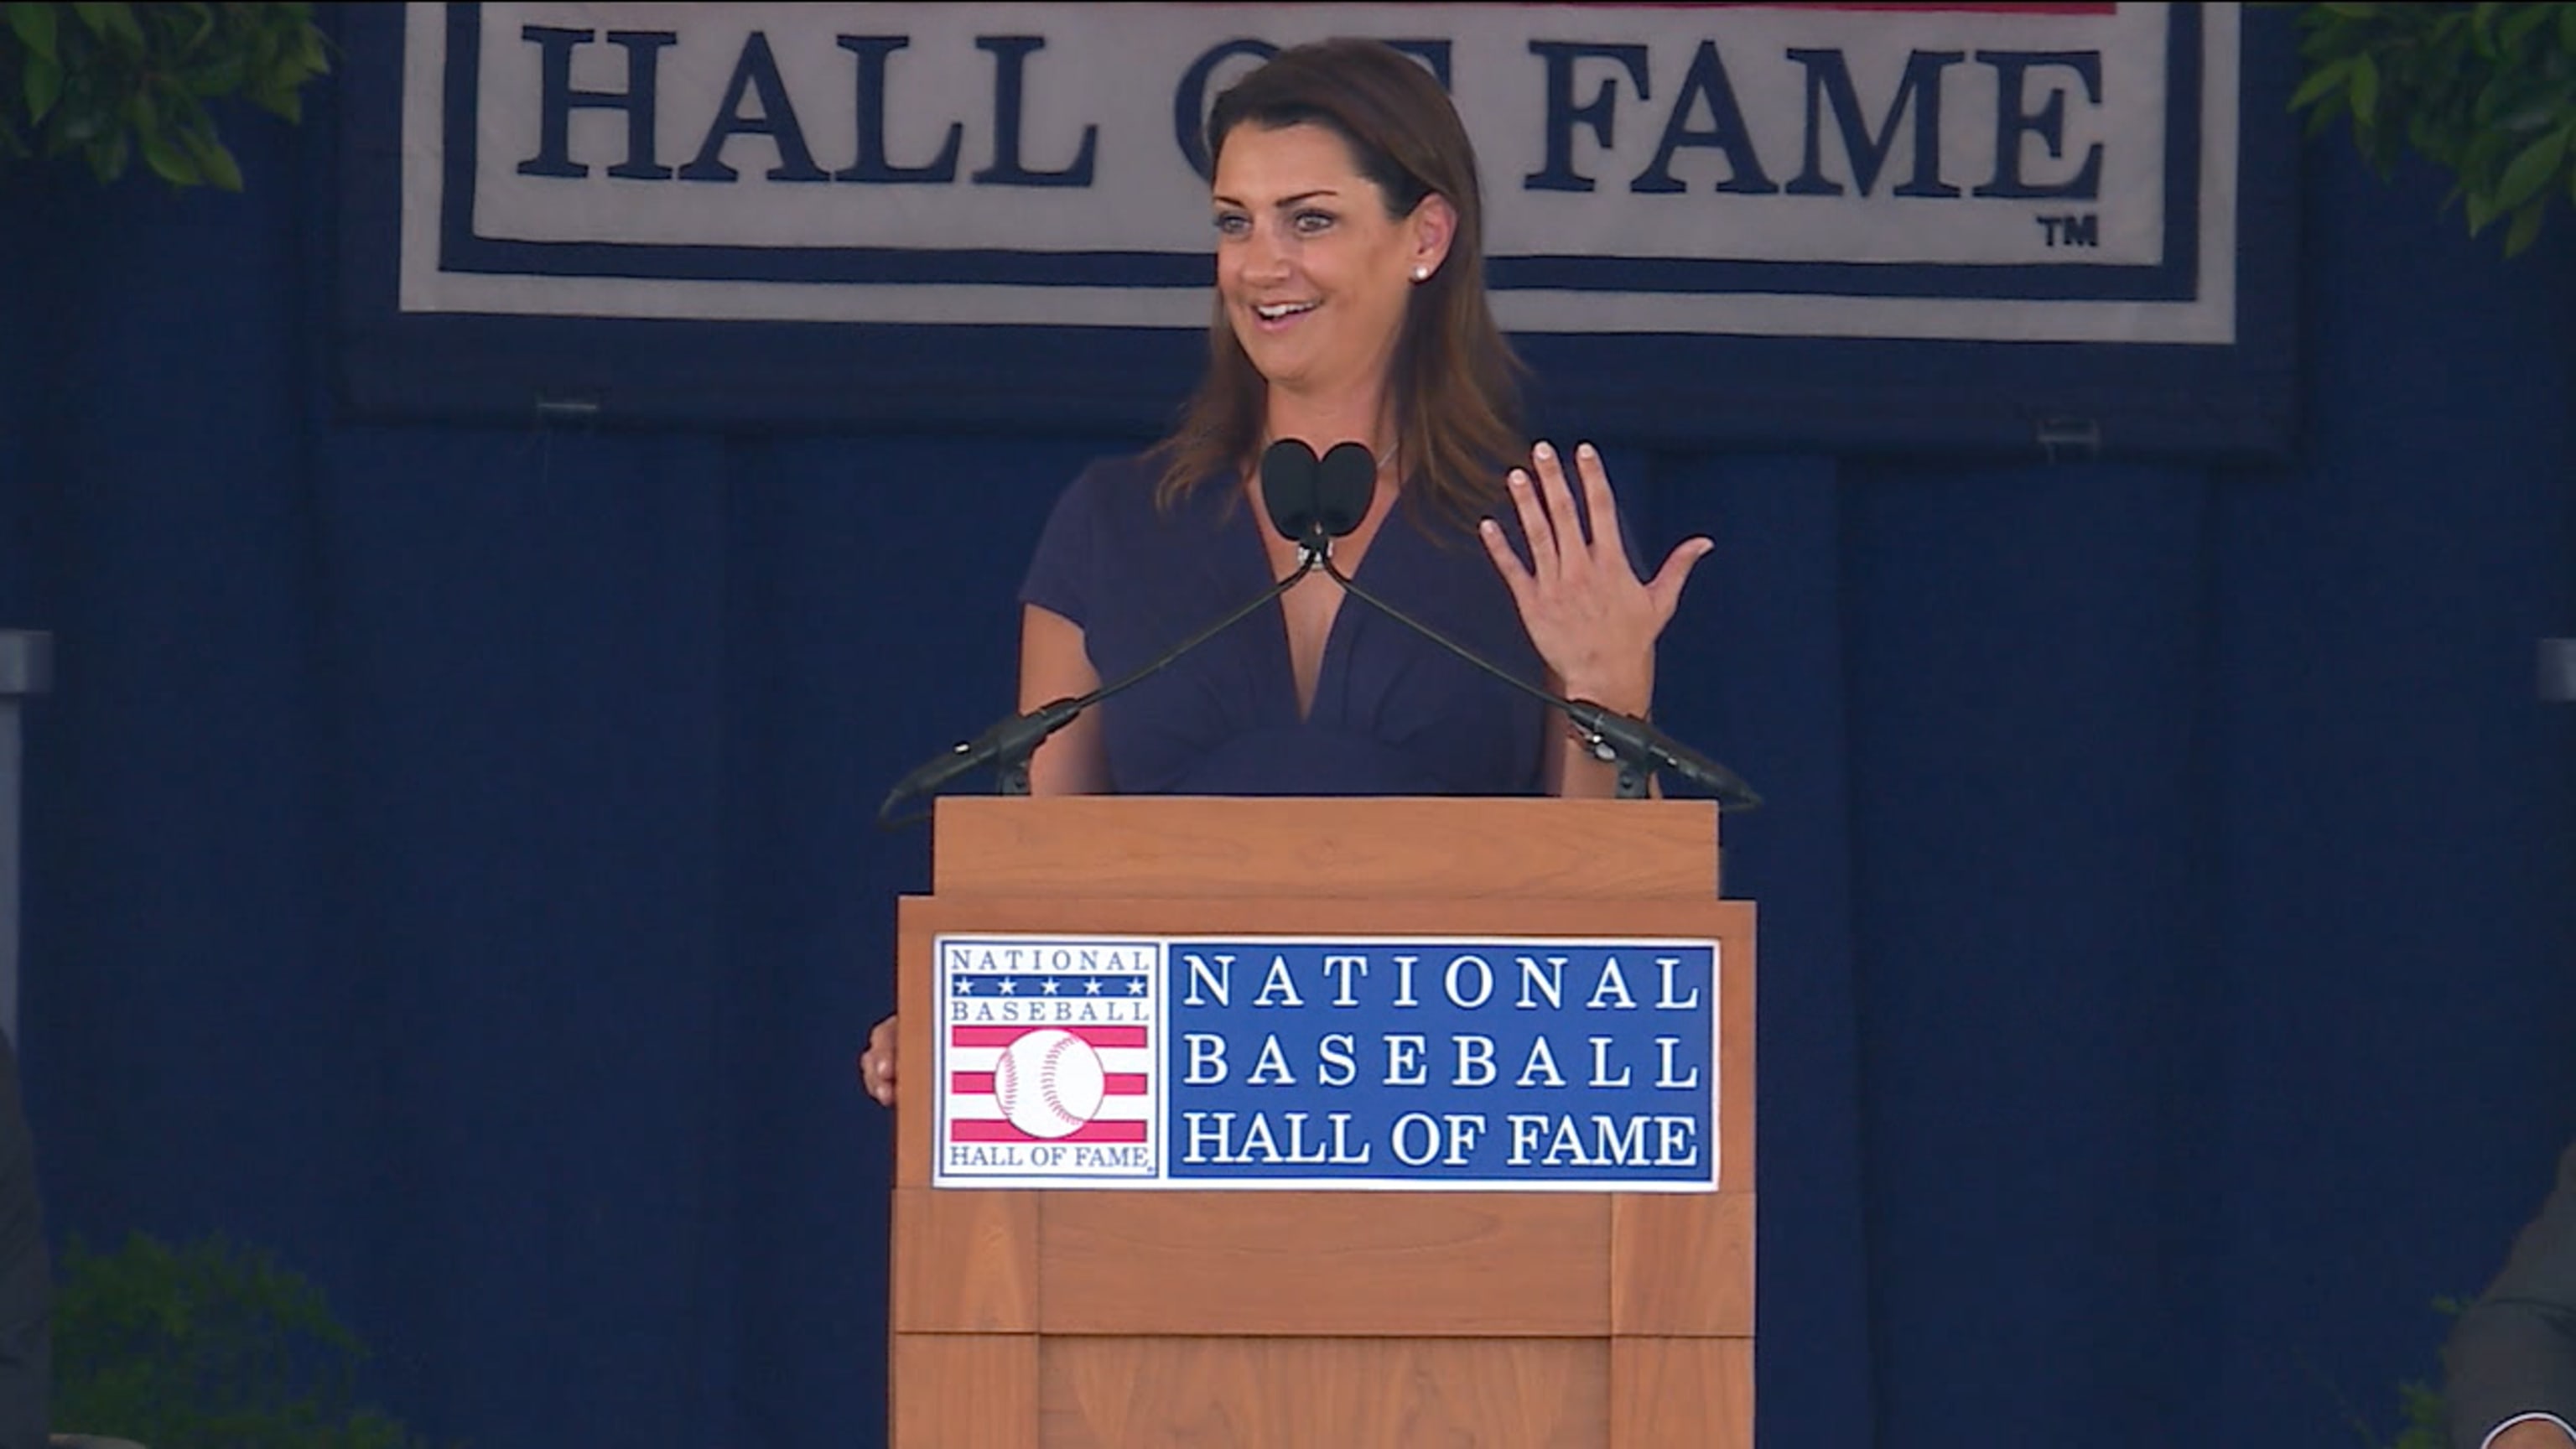 VIDEO: Brandy Halladay Speech at Hall of Fame Ceremony for Husband Roy  Halladay Was a Tearjerker